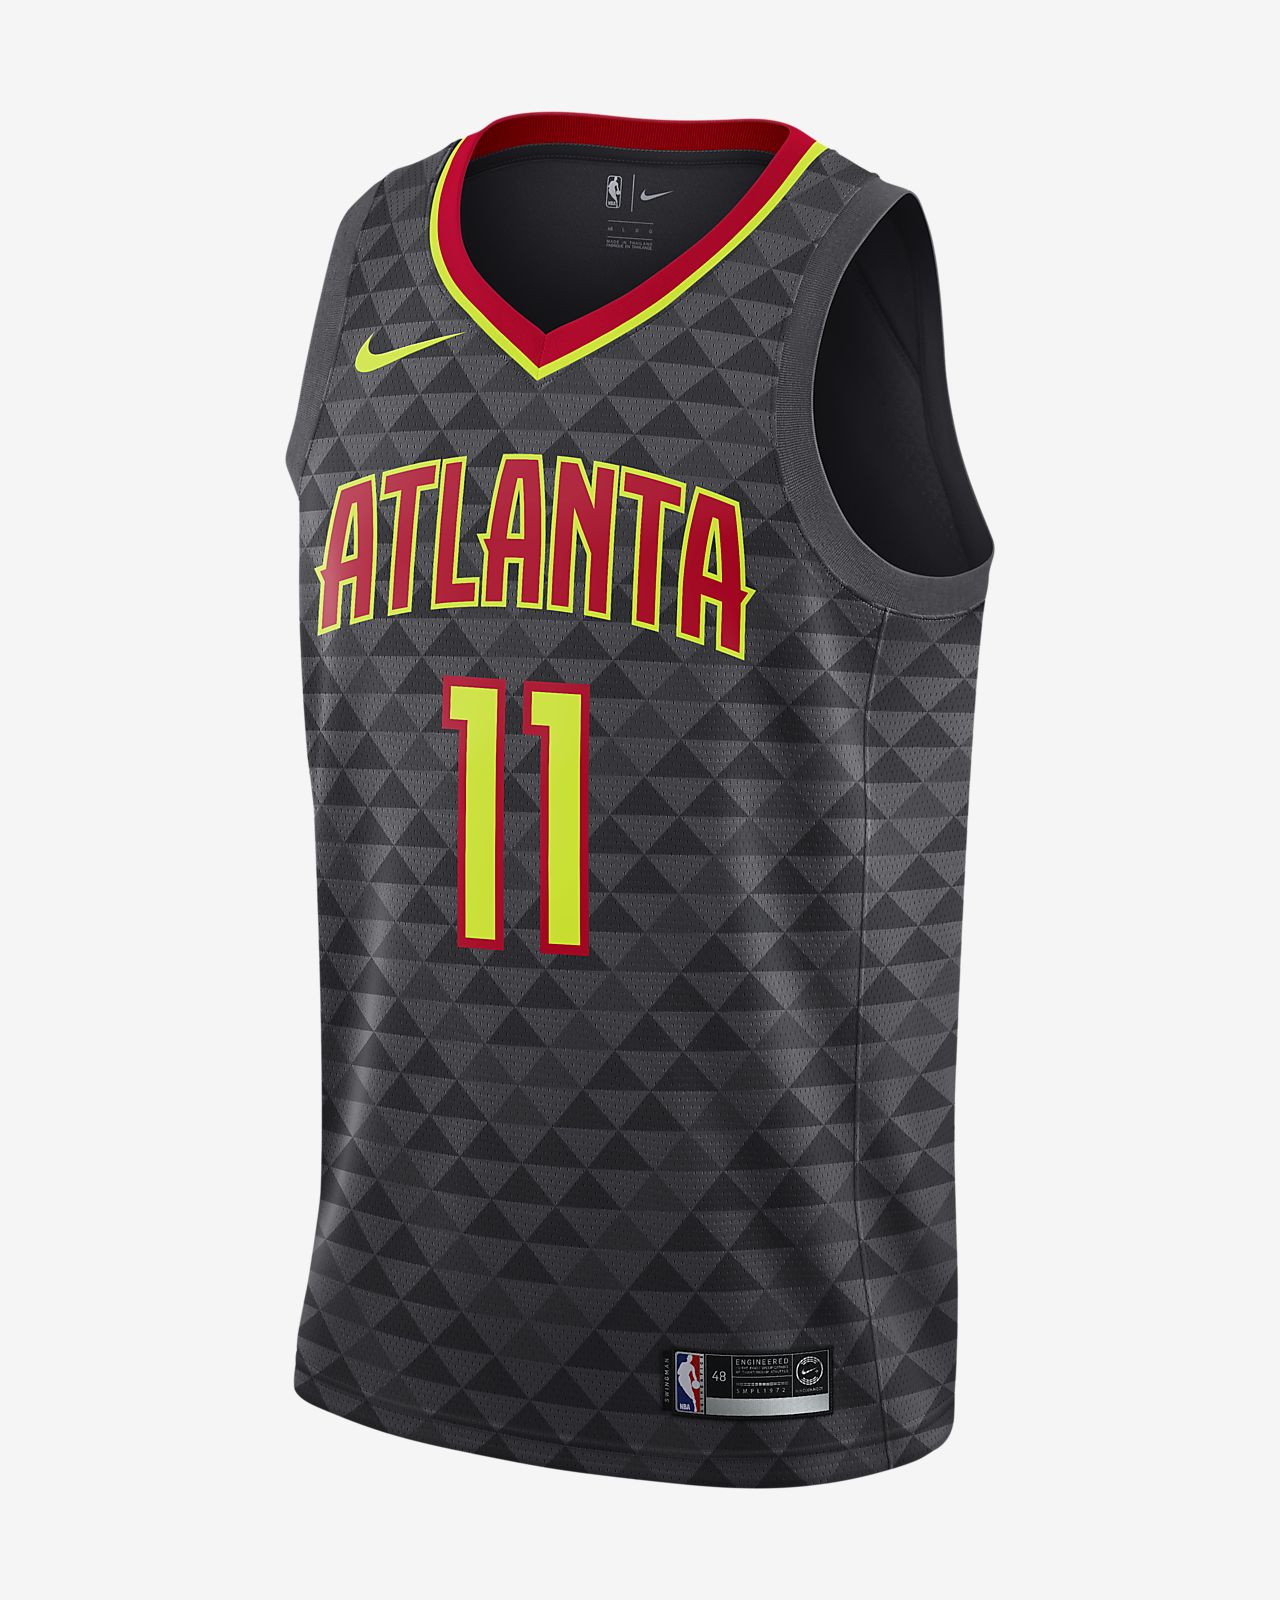 trae young nba jersey